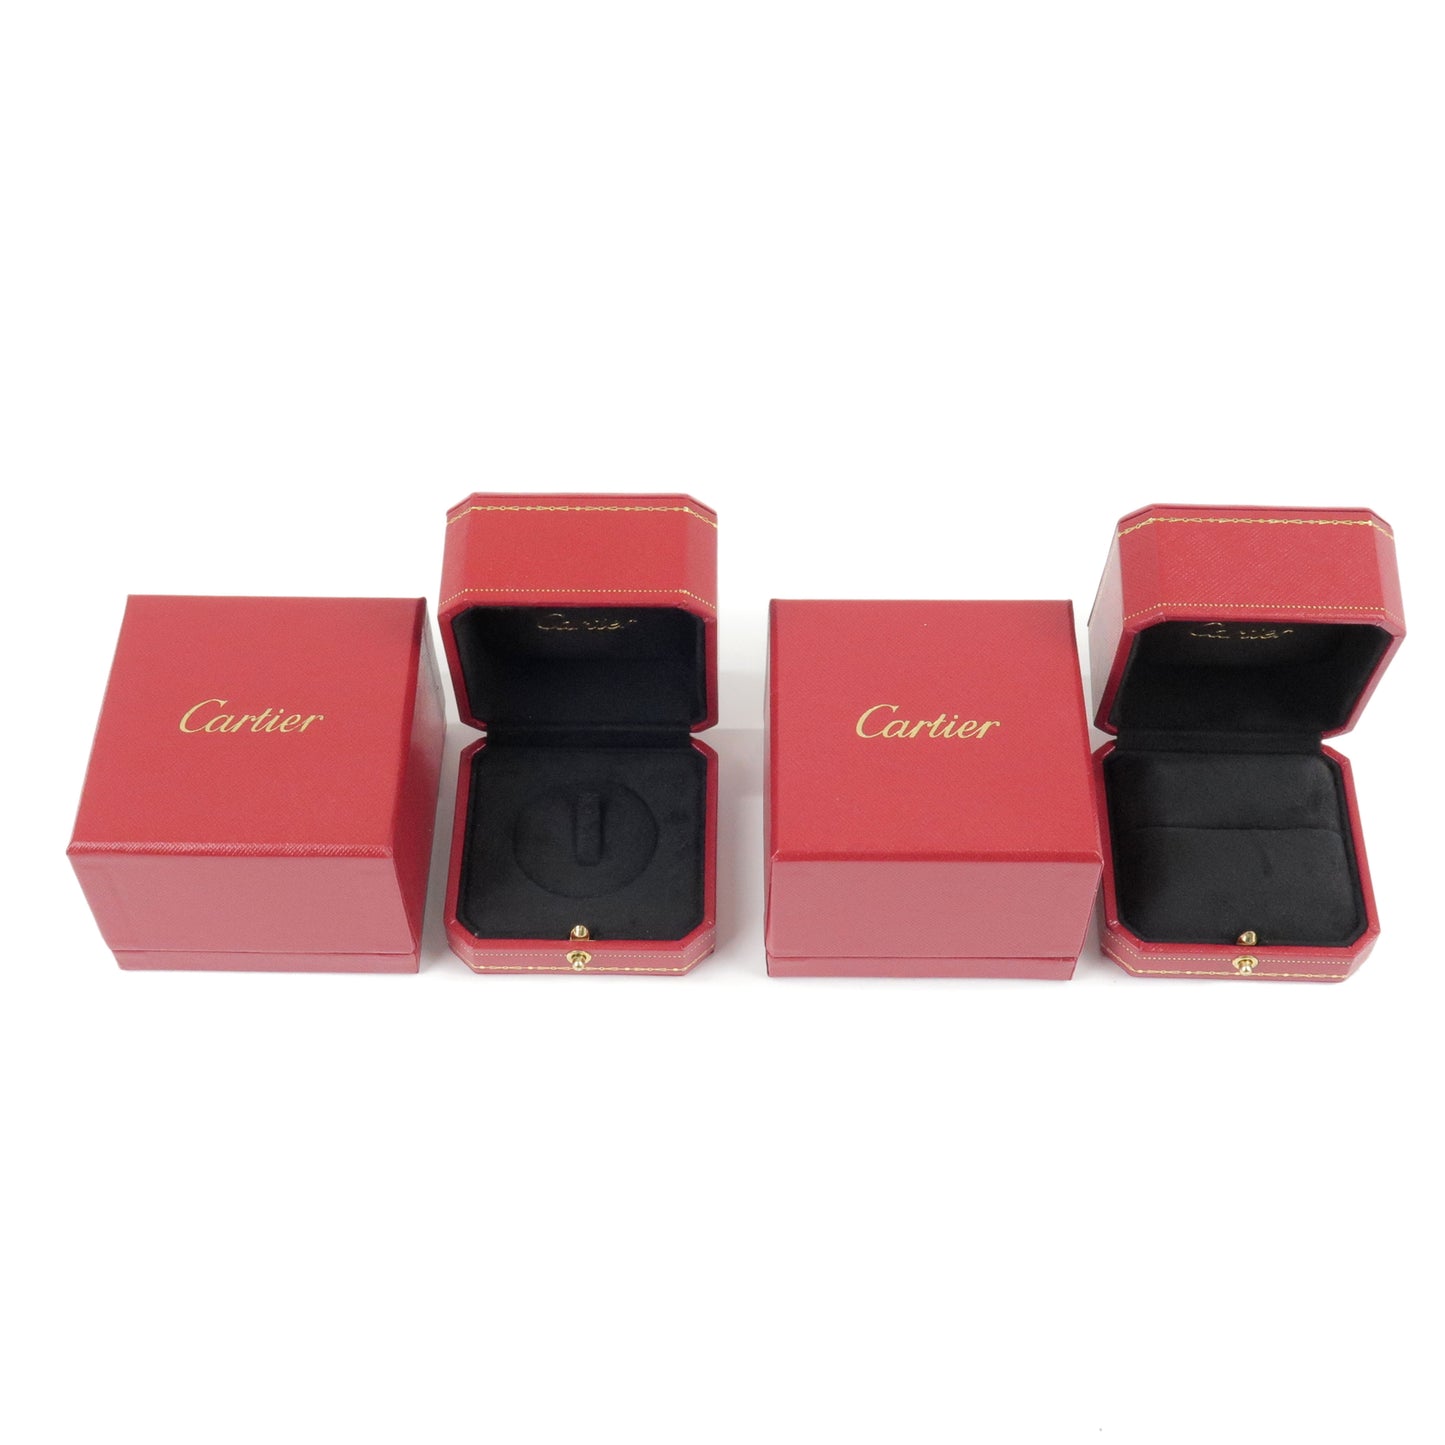 Cartier-Set-of-2-Ring-Display-Box-Jewelry-Box-For-Ring-Red